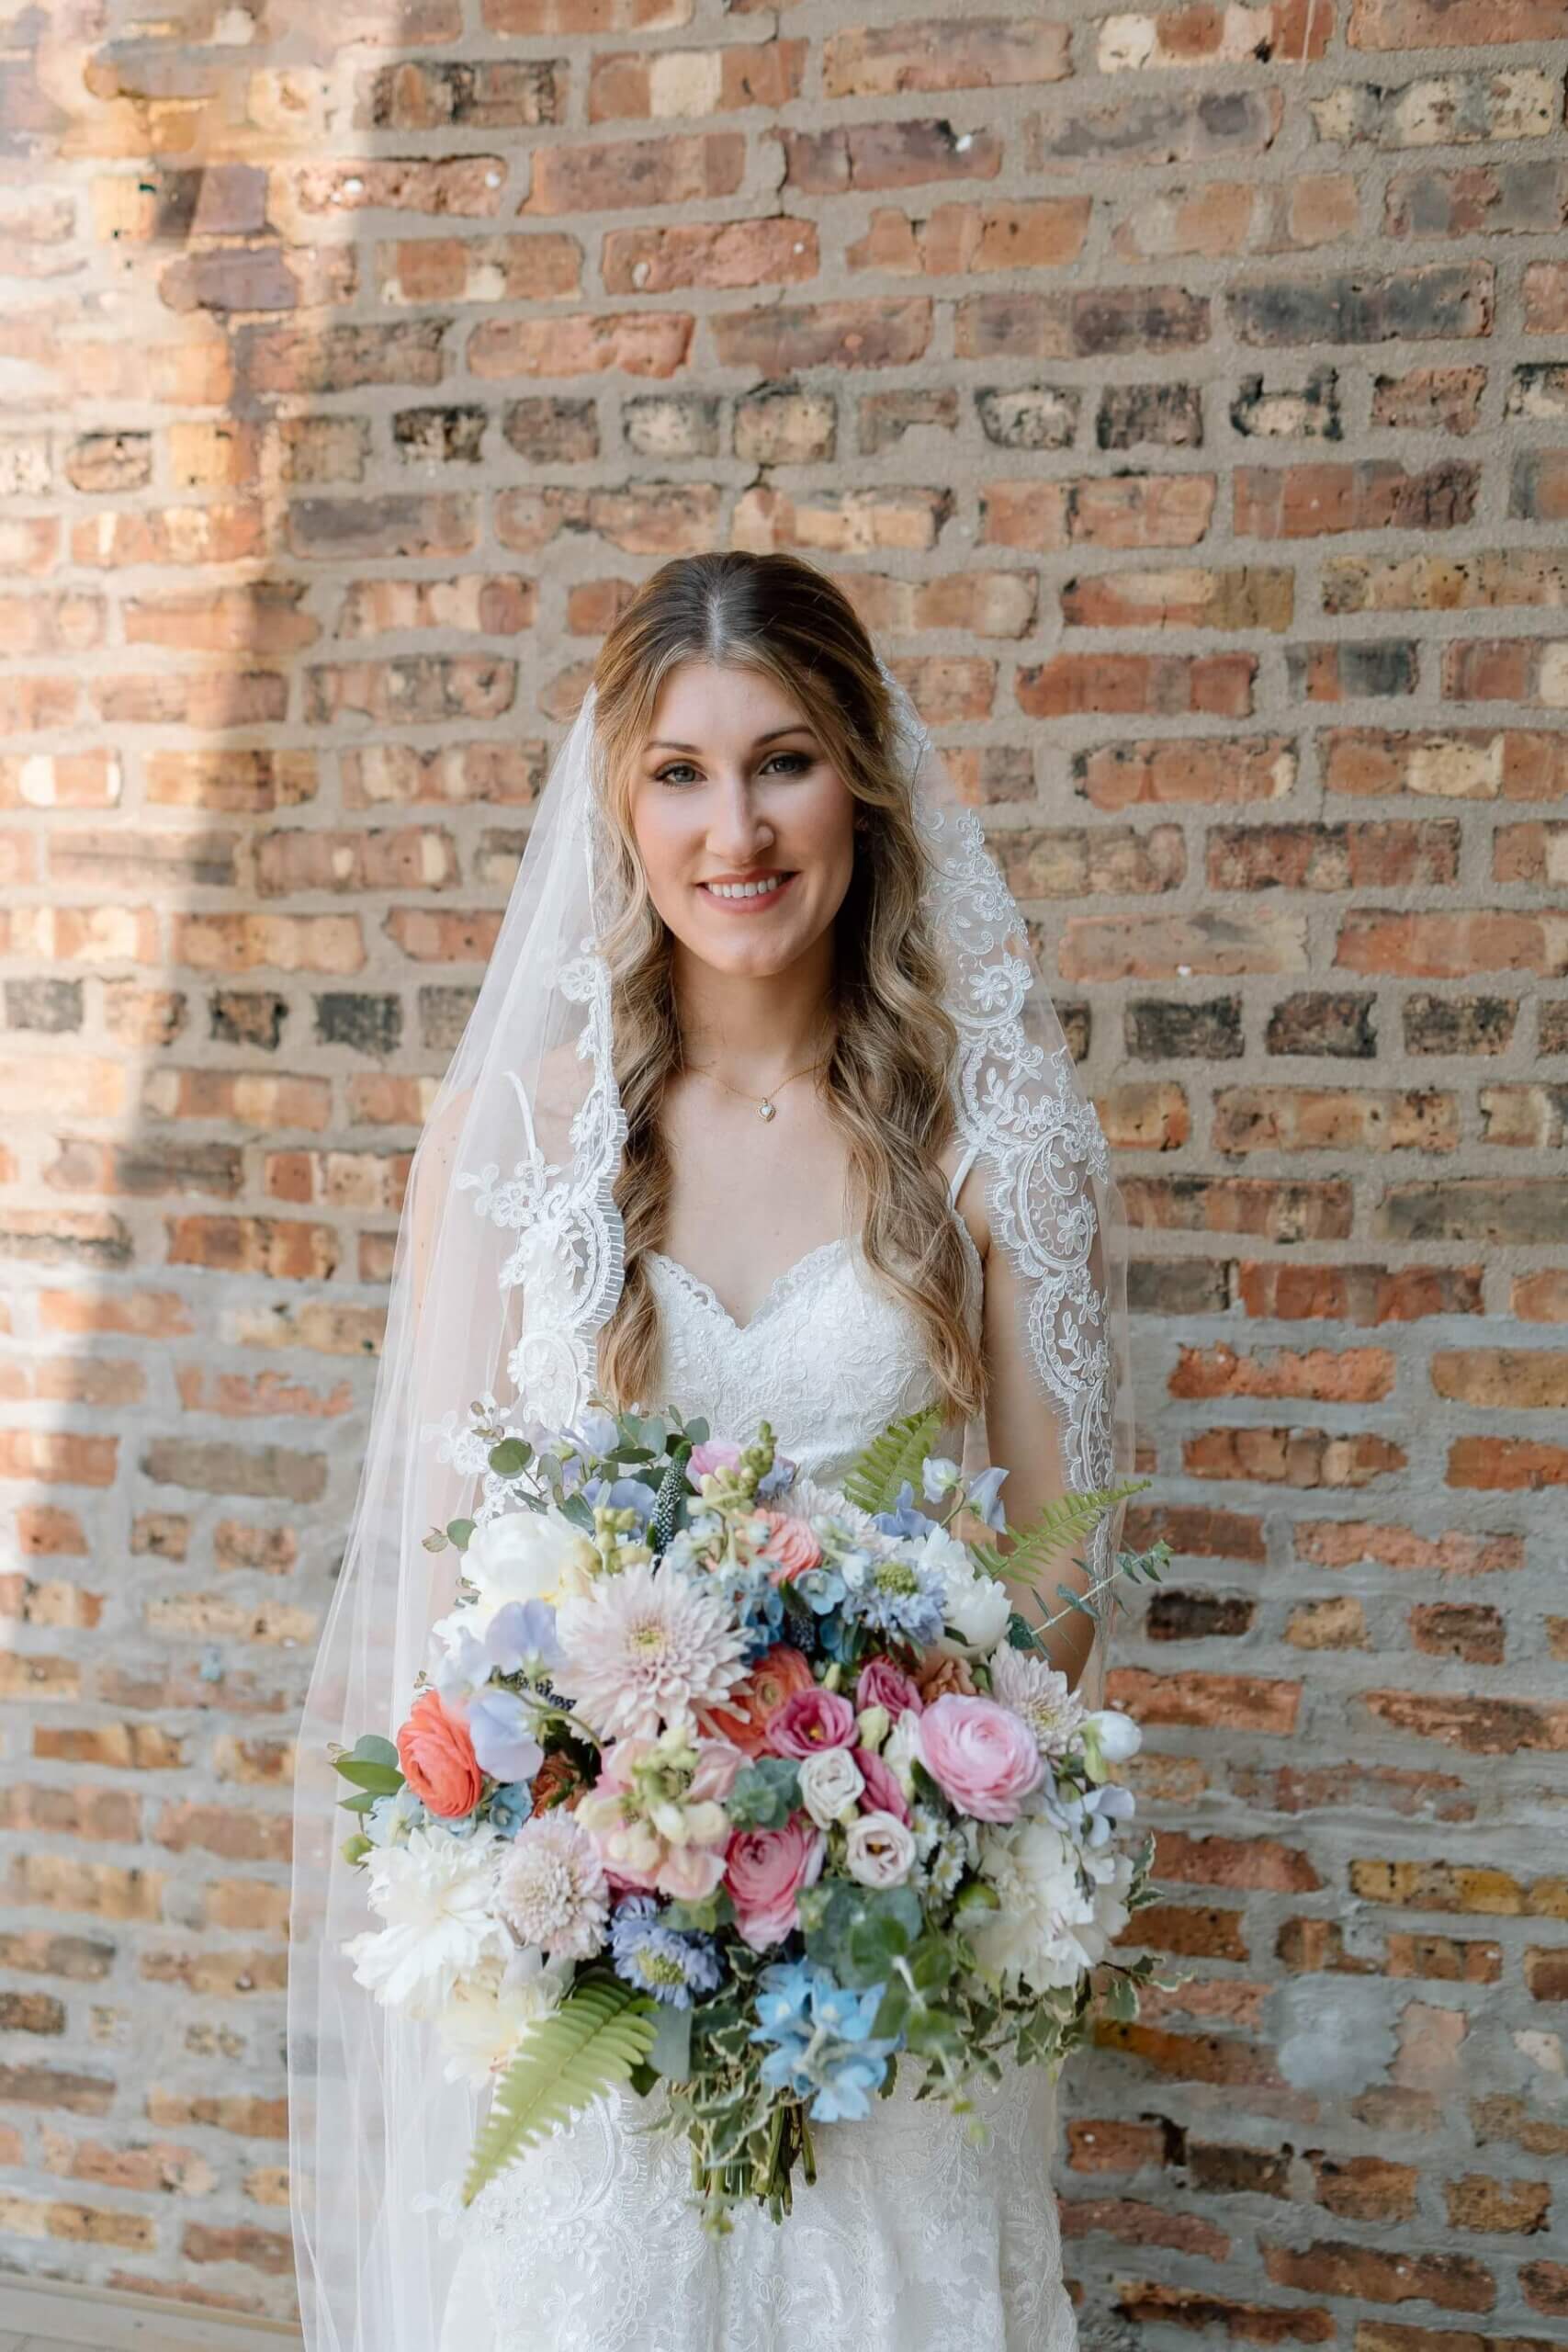 Bride wearing lace gown with lace veil holding colorful summer bouquet